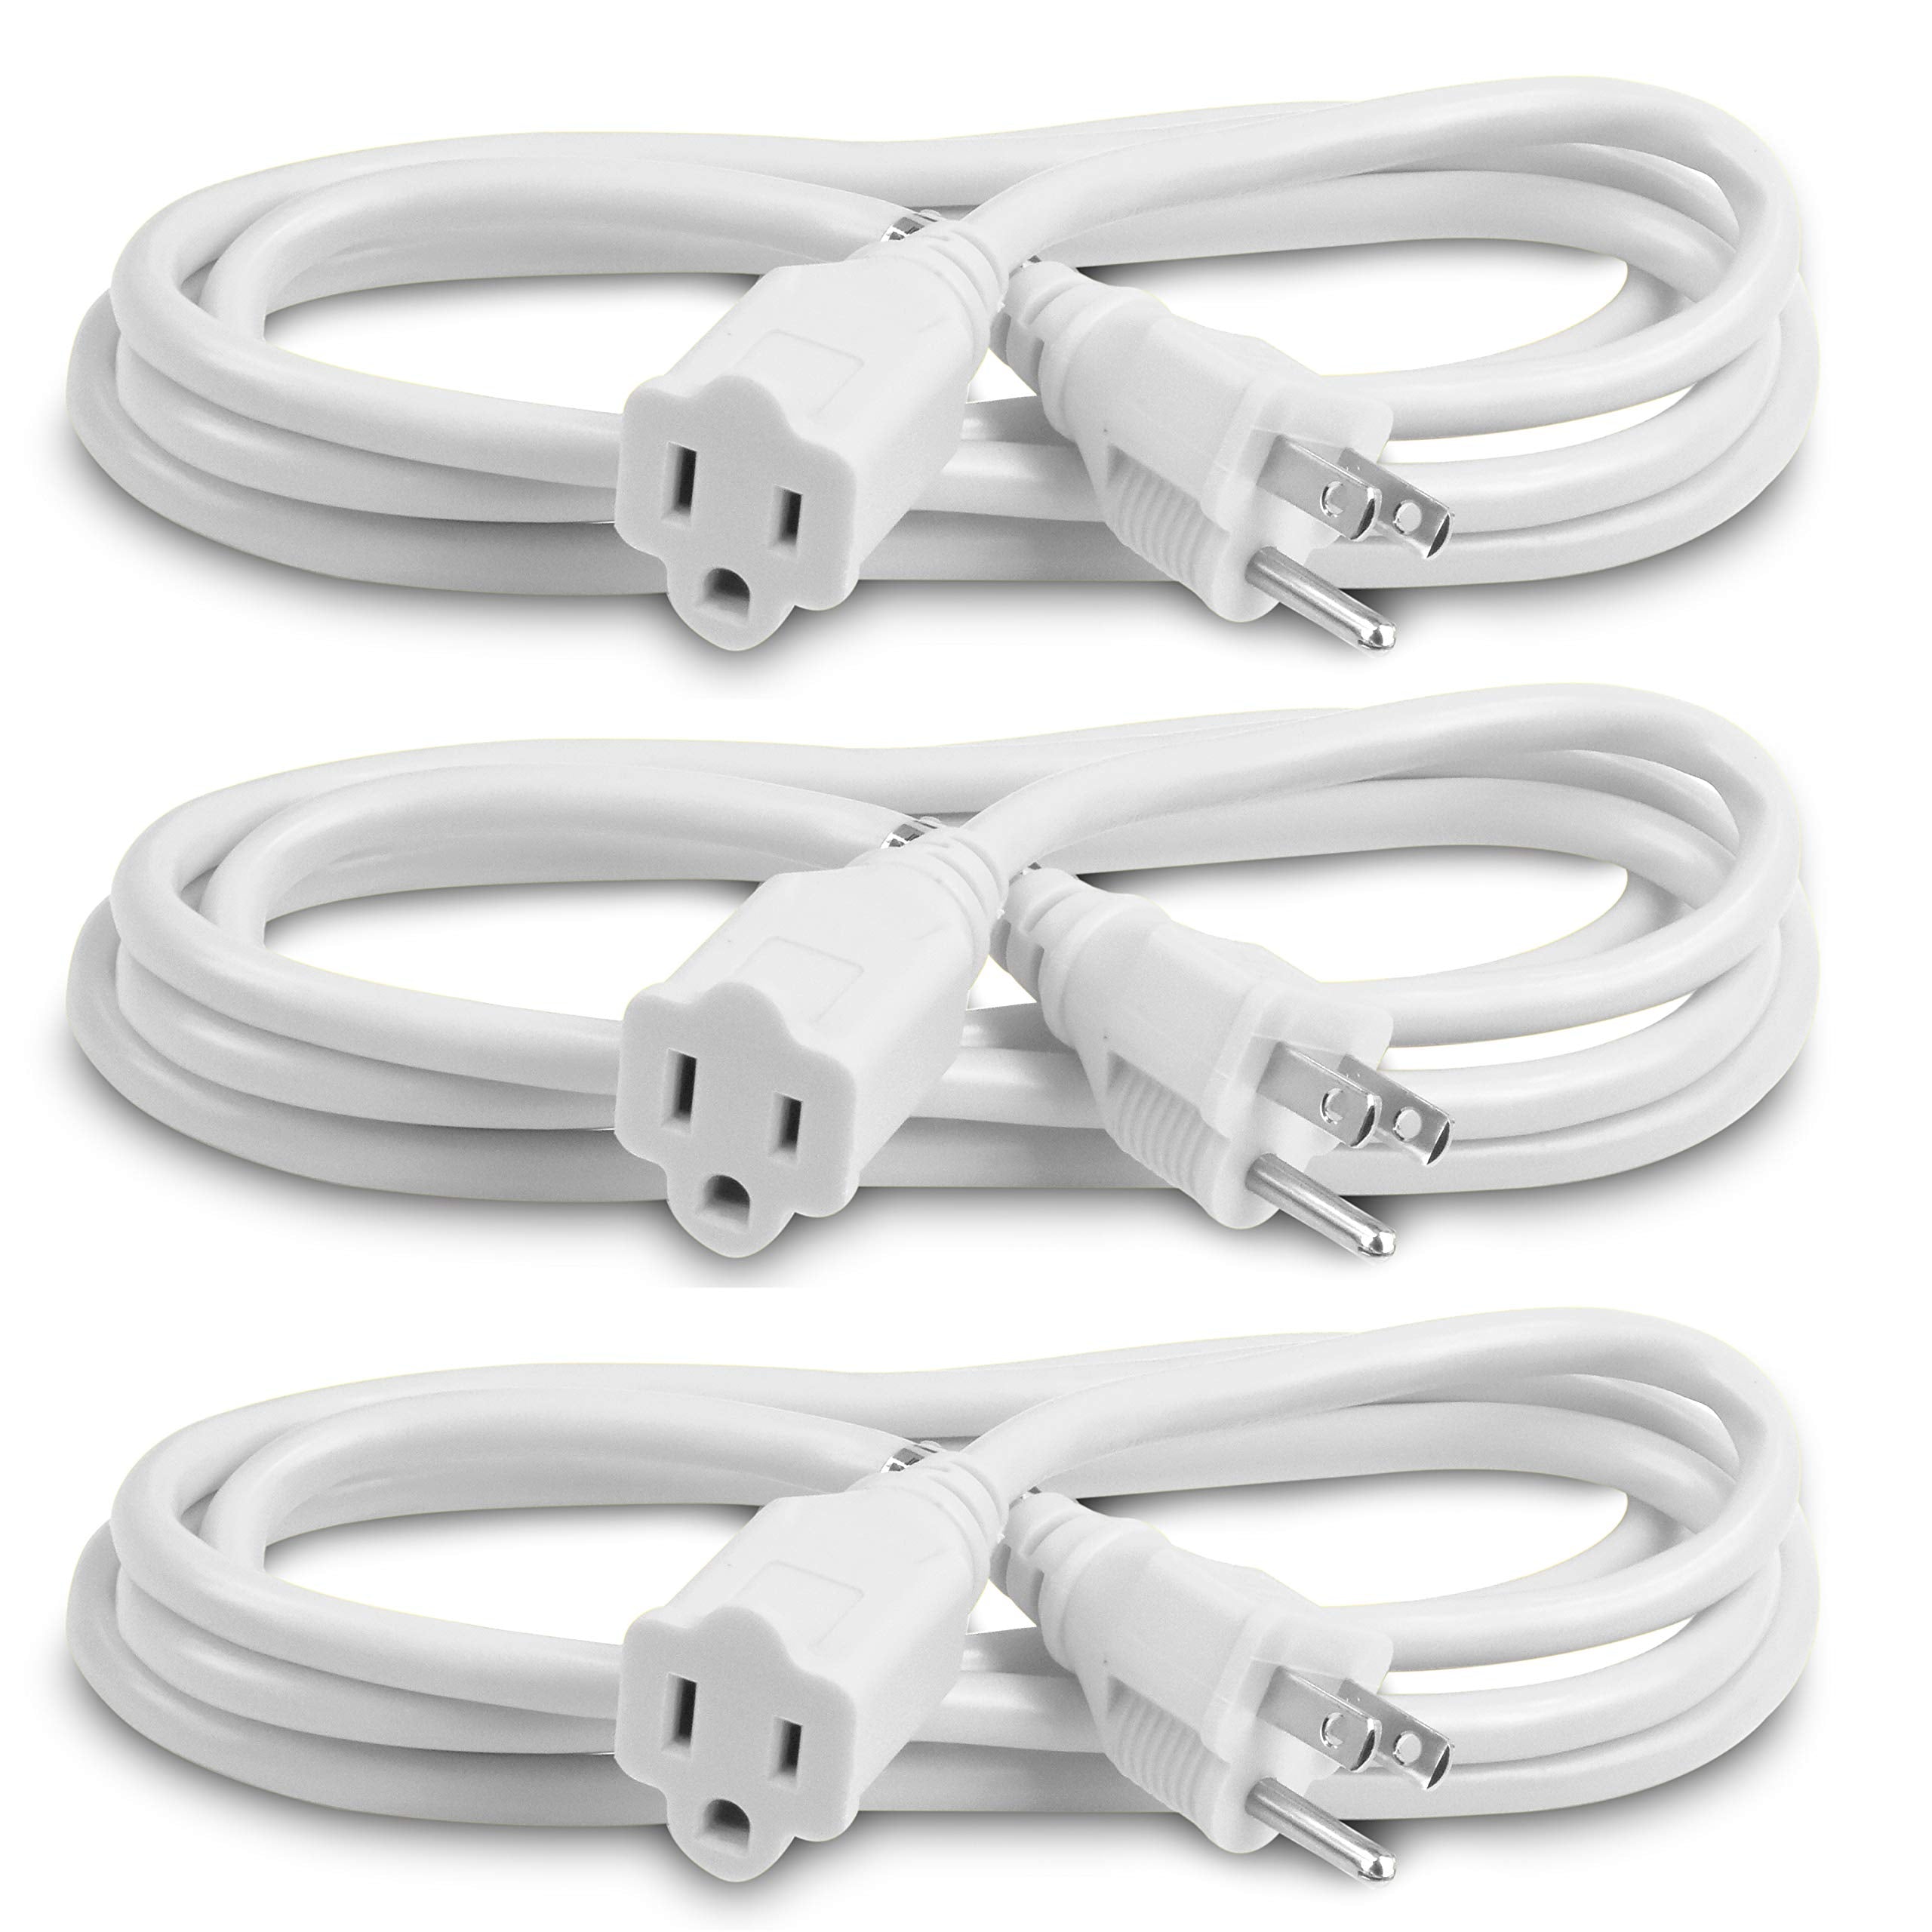 BindMaster Heavy Duty Extension Cord/Wire Power Cable, Indoor/Outdoor, 16/3, Single Outlet, 15 Feet, UL Listed, White (3 Pack)  - Very Good